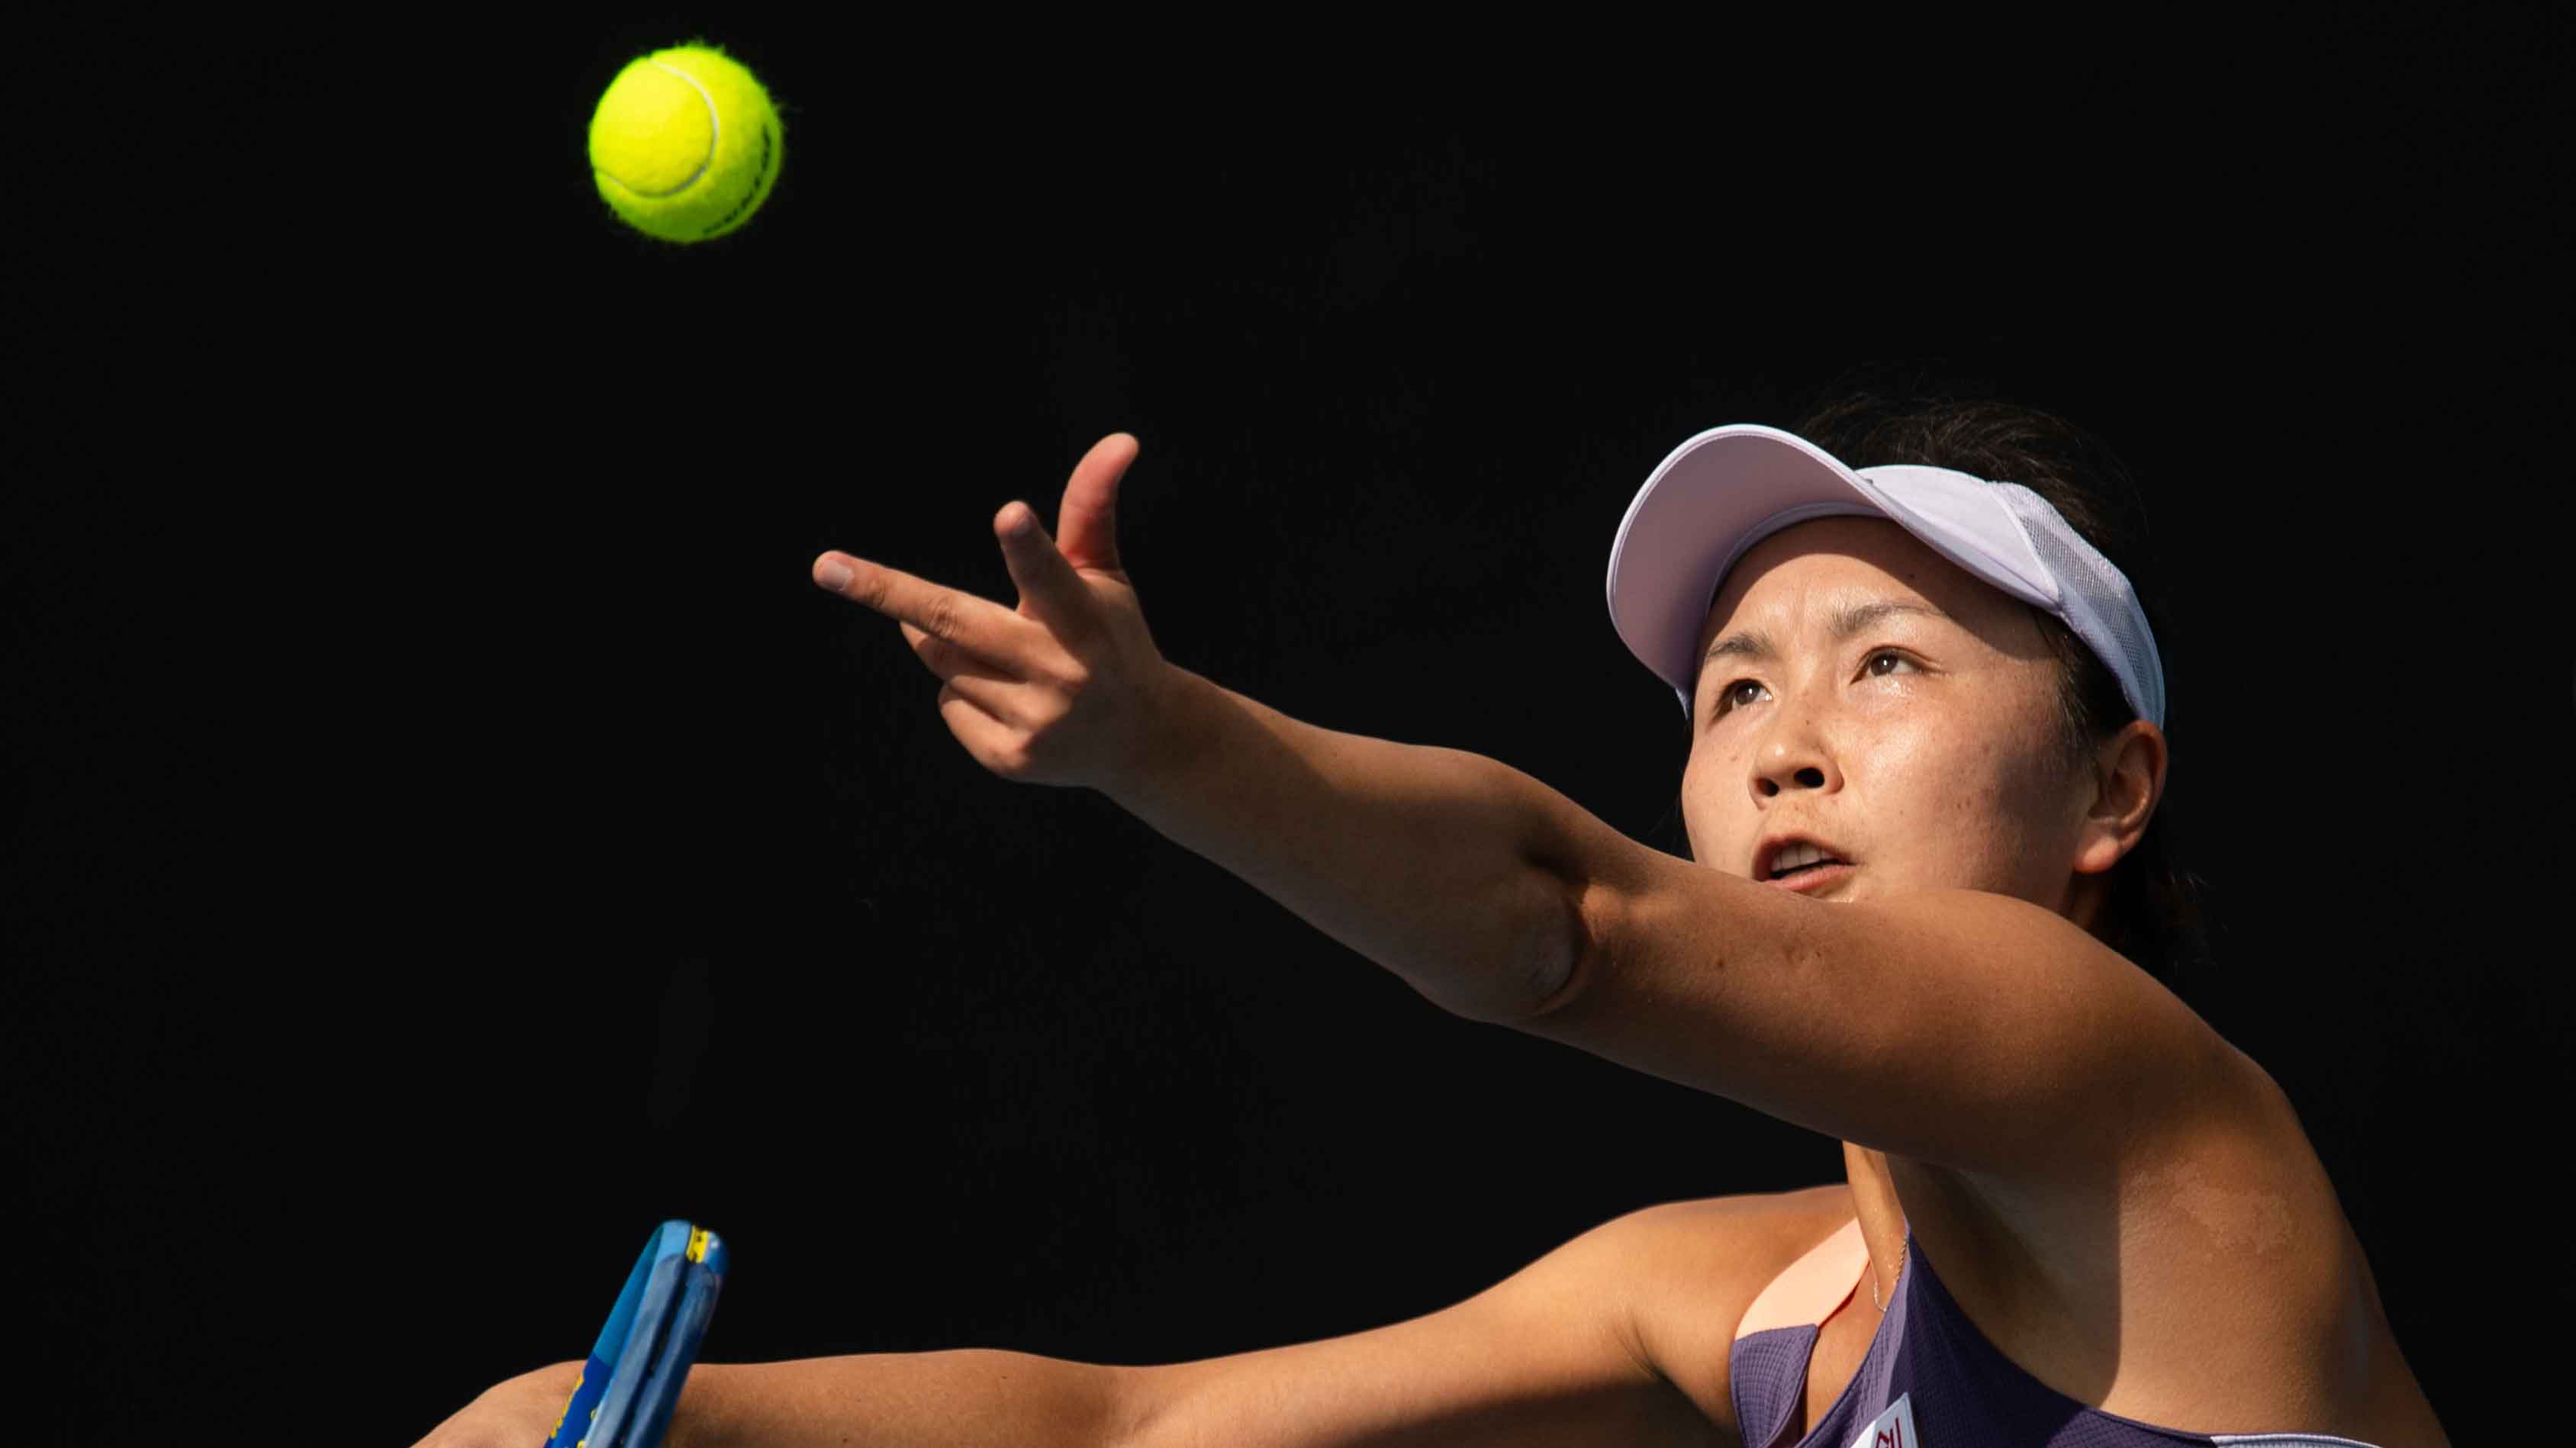 ITF Resumes Tennis in China With No Resolution on Peng Shuai